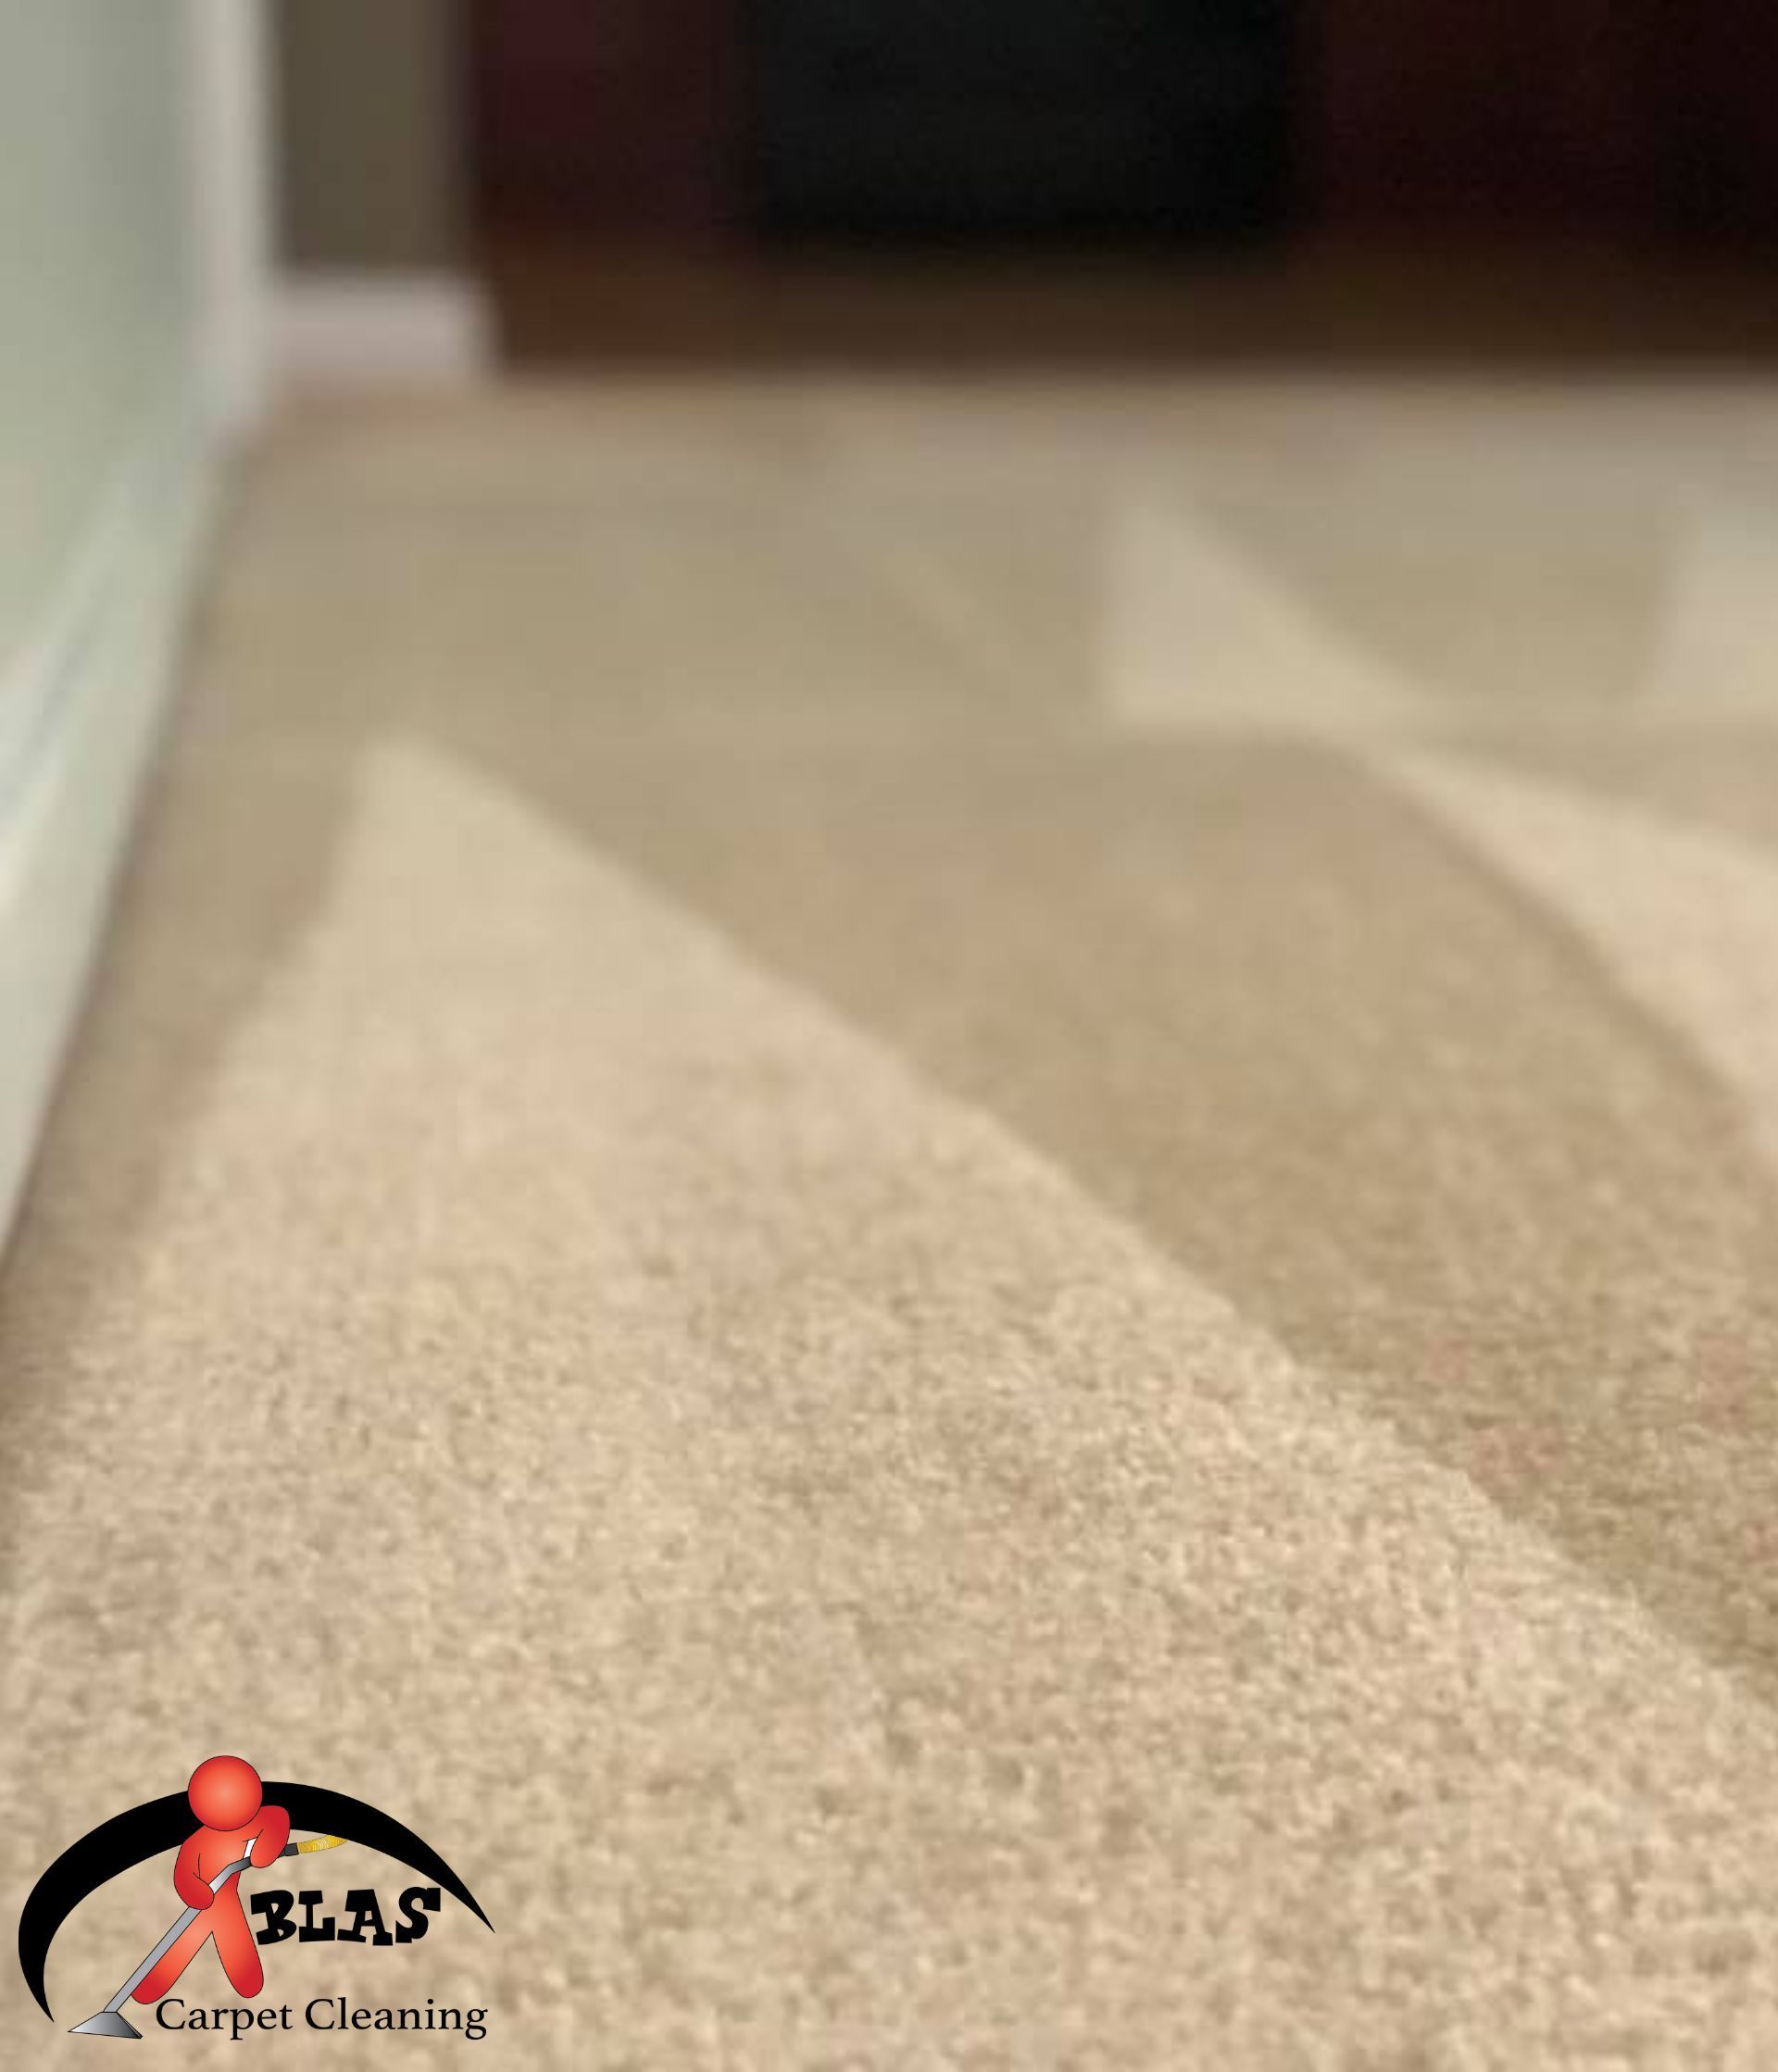 Result of carpet getting steam cleaned by professional company in Atlanta, Georgia..